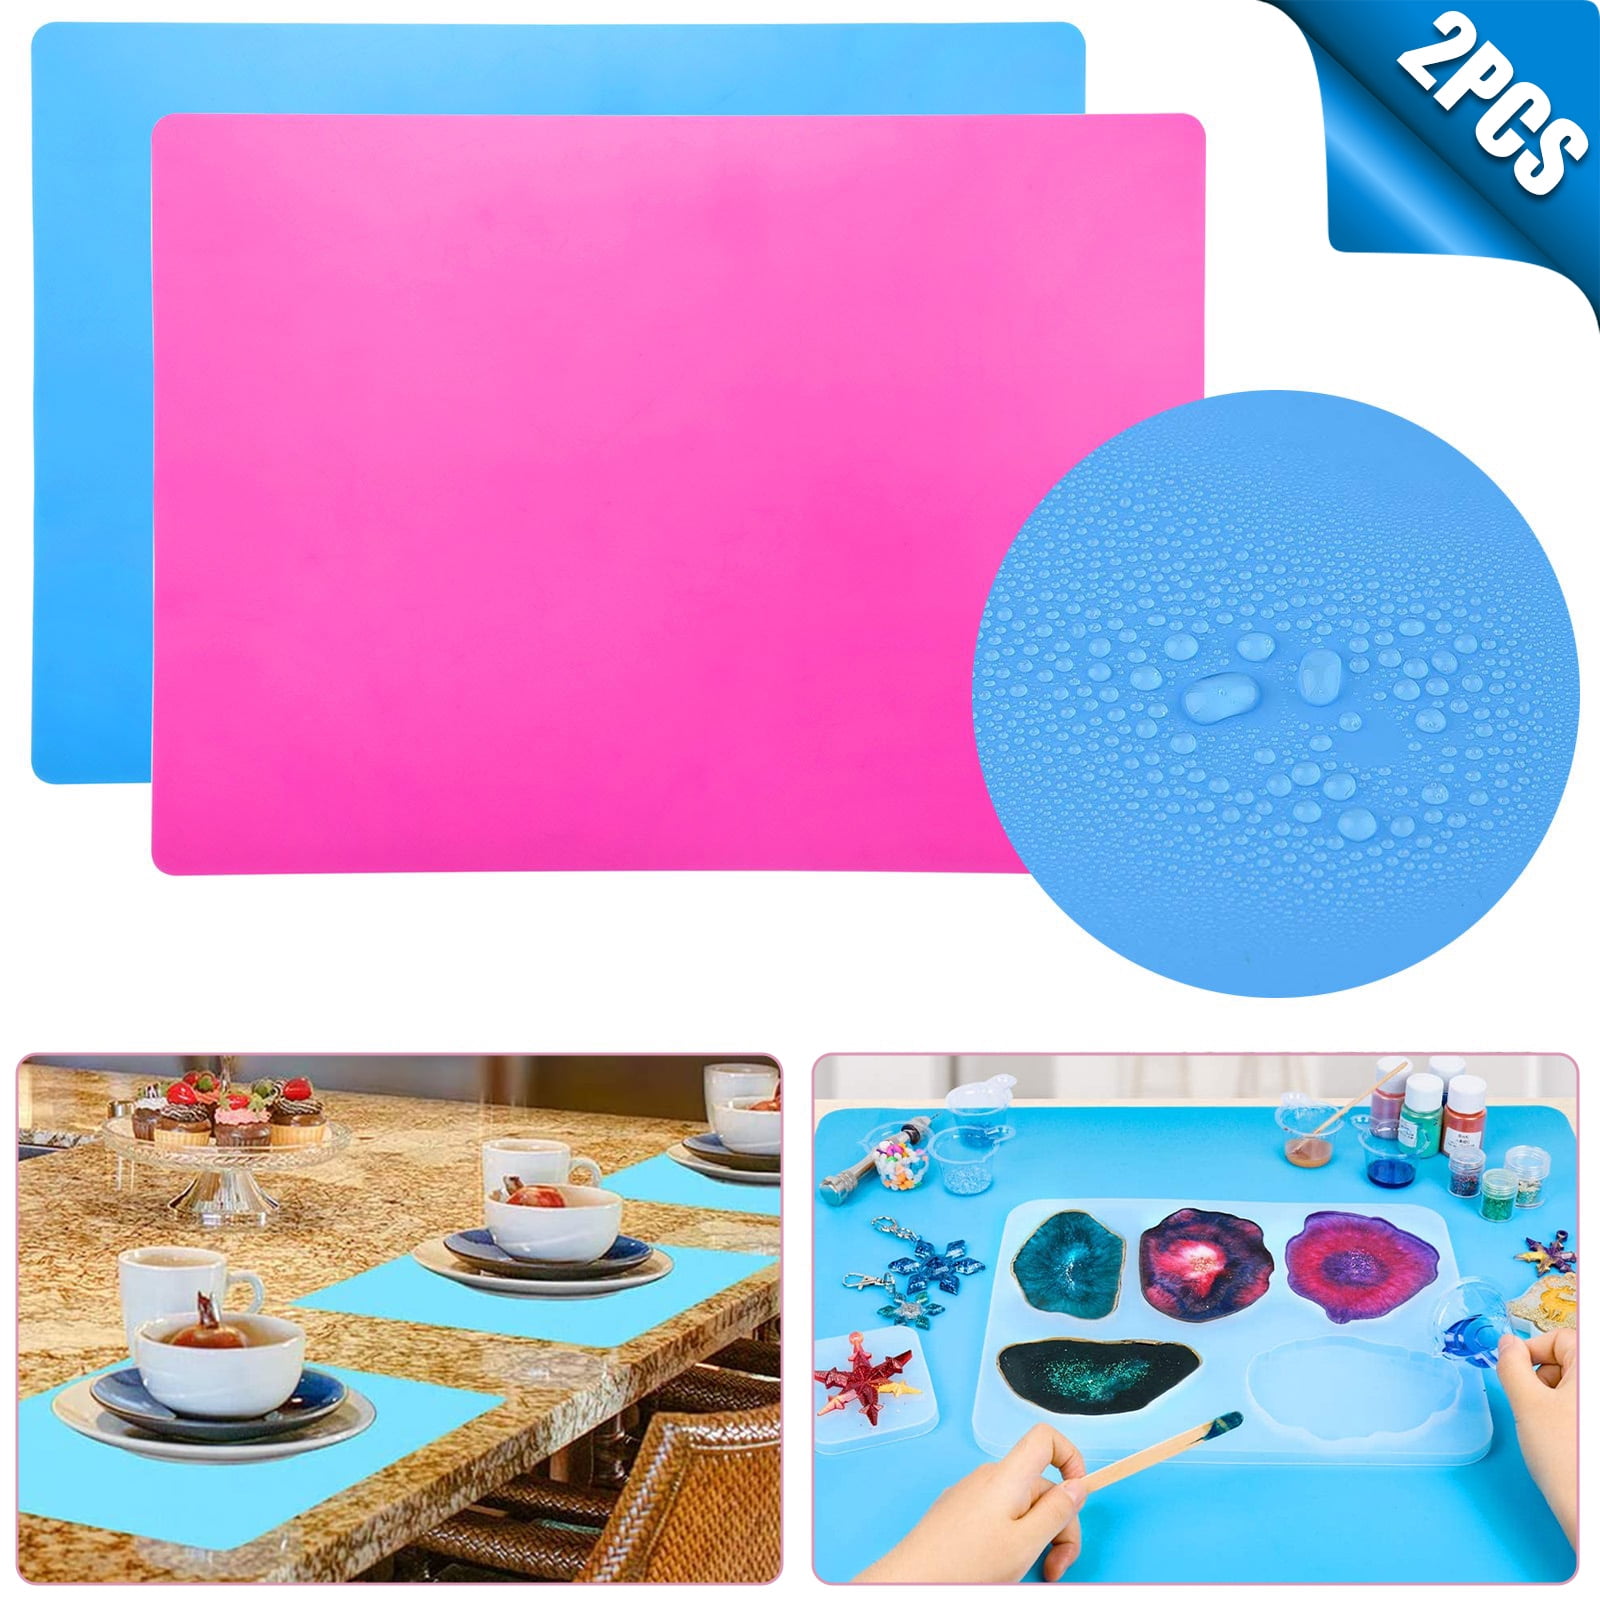 Outivity 2 Pack A3 Large Silicone Sheet for Crafts with 2 PCS Silicone Stir Sticks and 2 PCS Silicone Brushes,Jewelry Casting Resin Moulds Mat Silicone Placemat Multipurpose Mat for Making Craft 